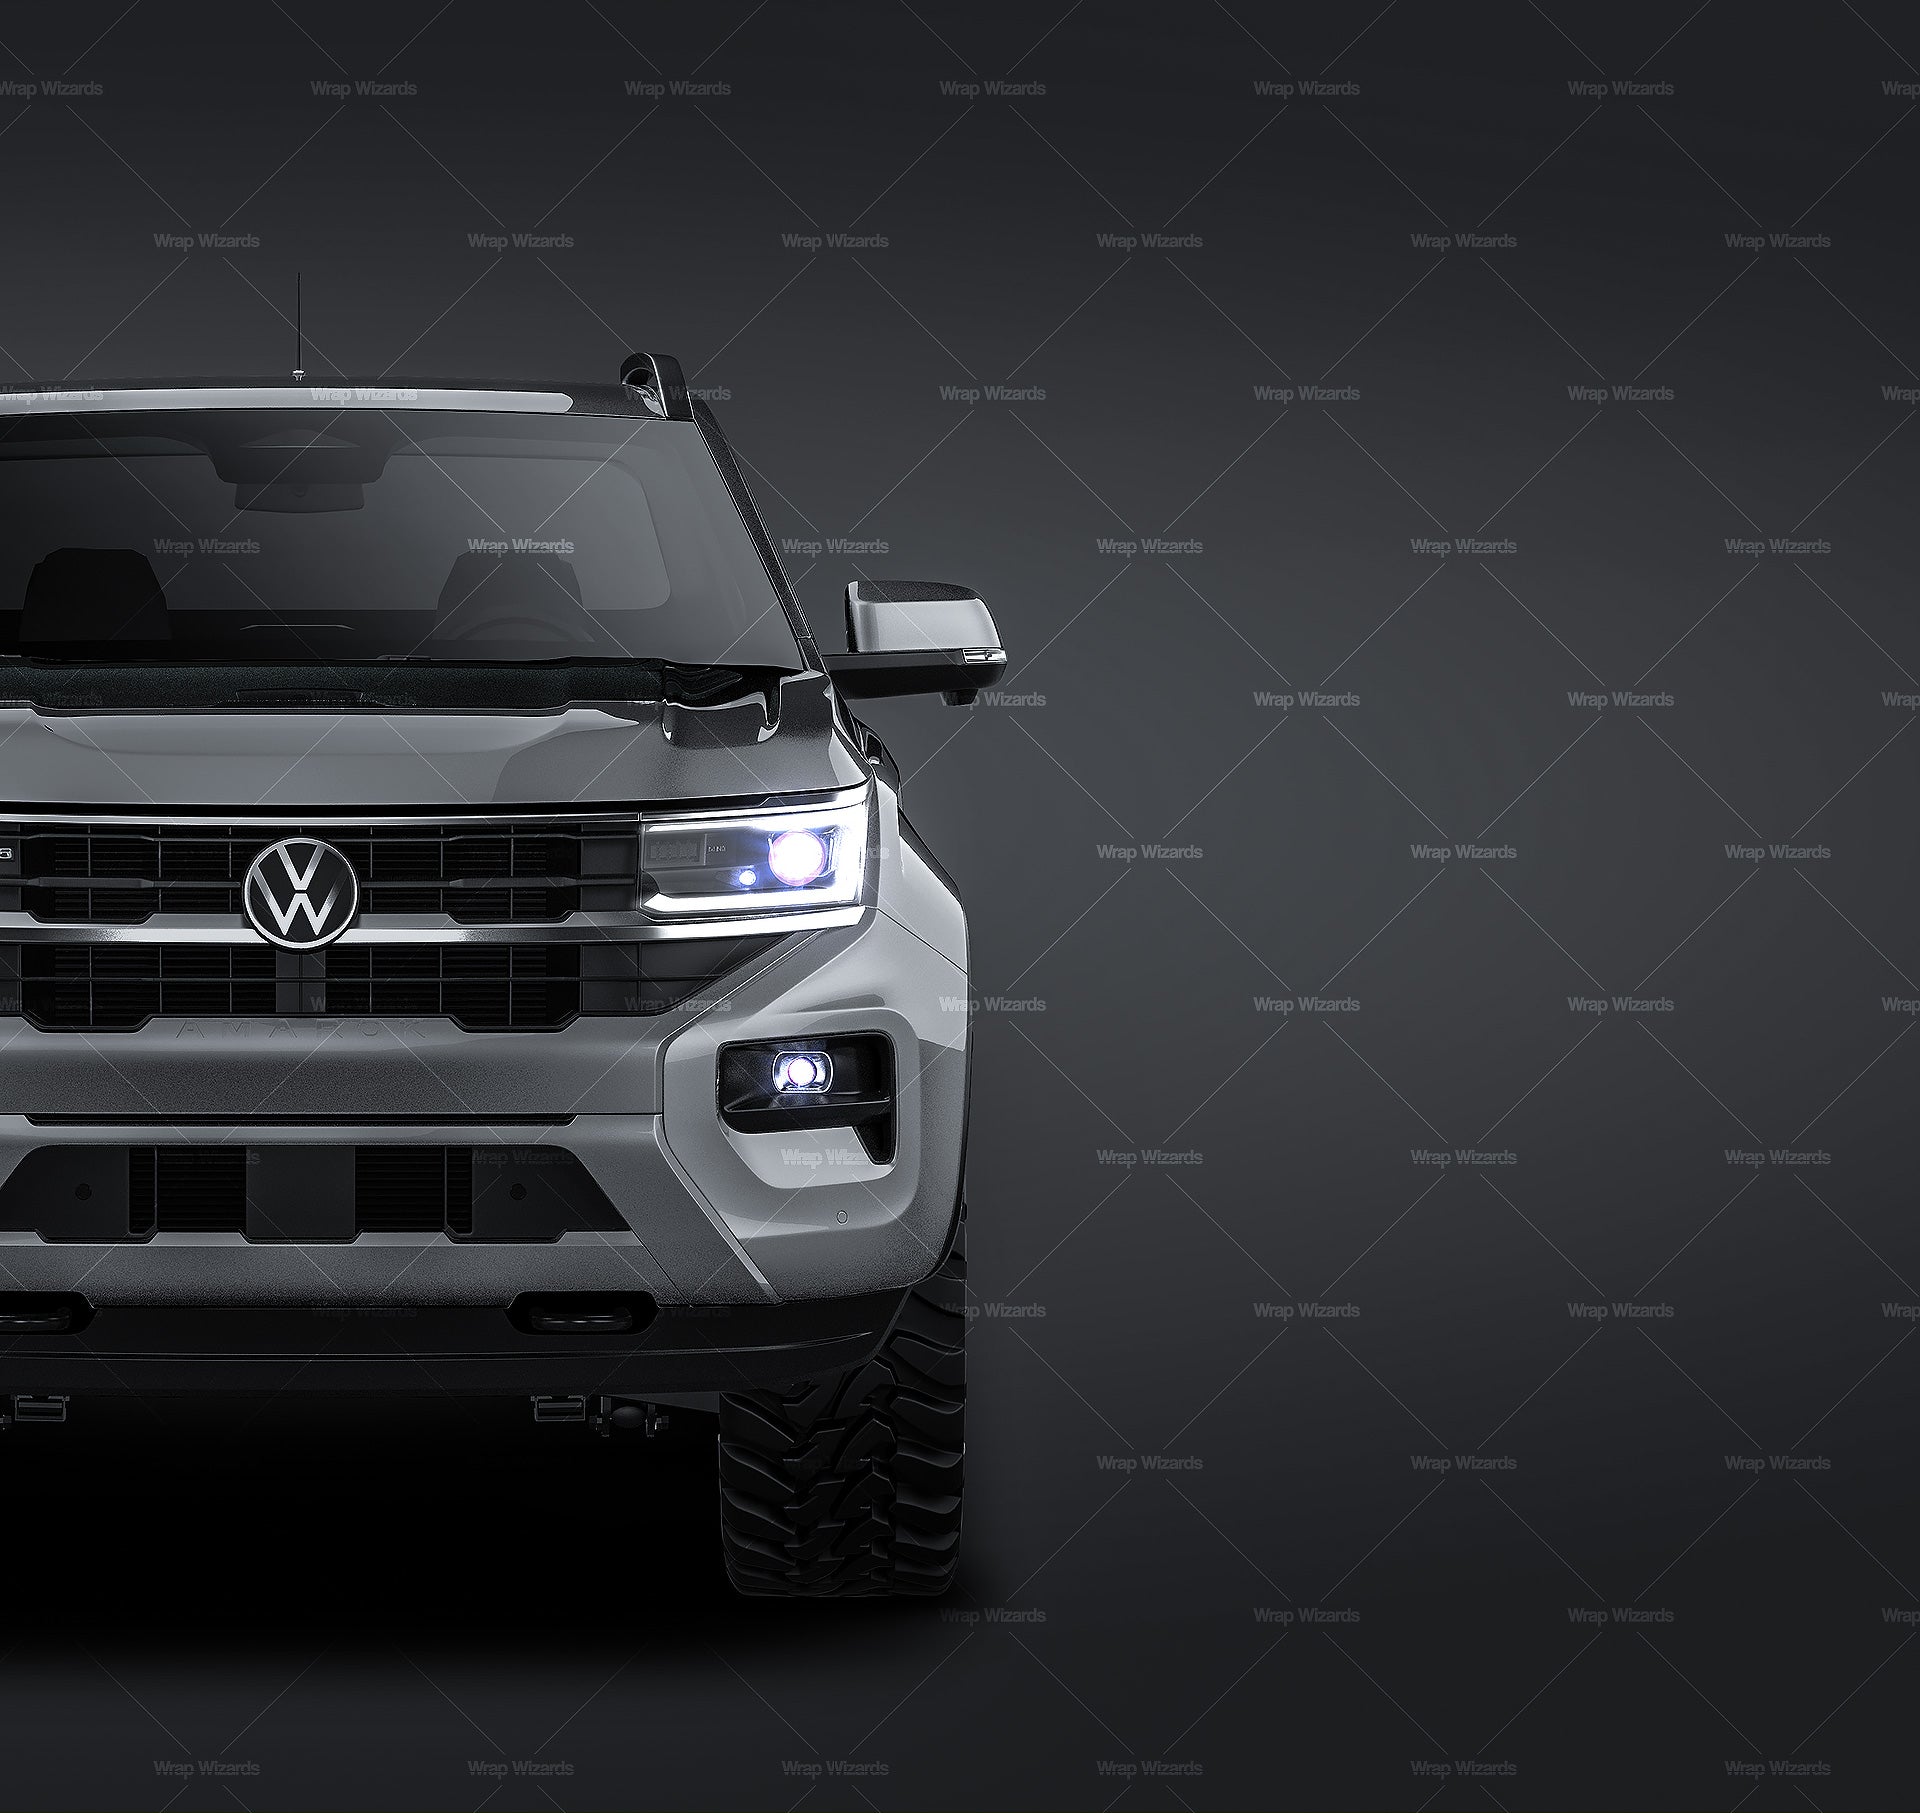 Volkswagen Amarok 2023 double cab glossy finish - all sides Car Mockup Template.psd